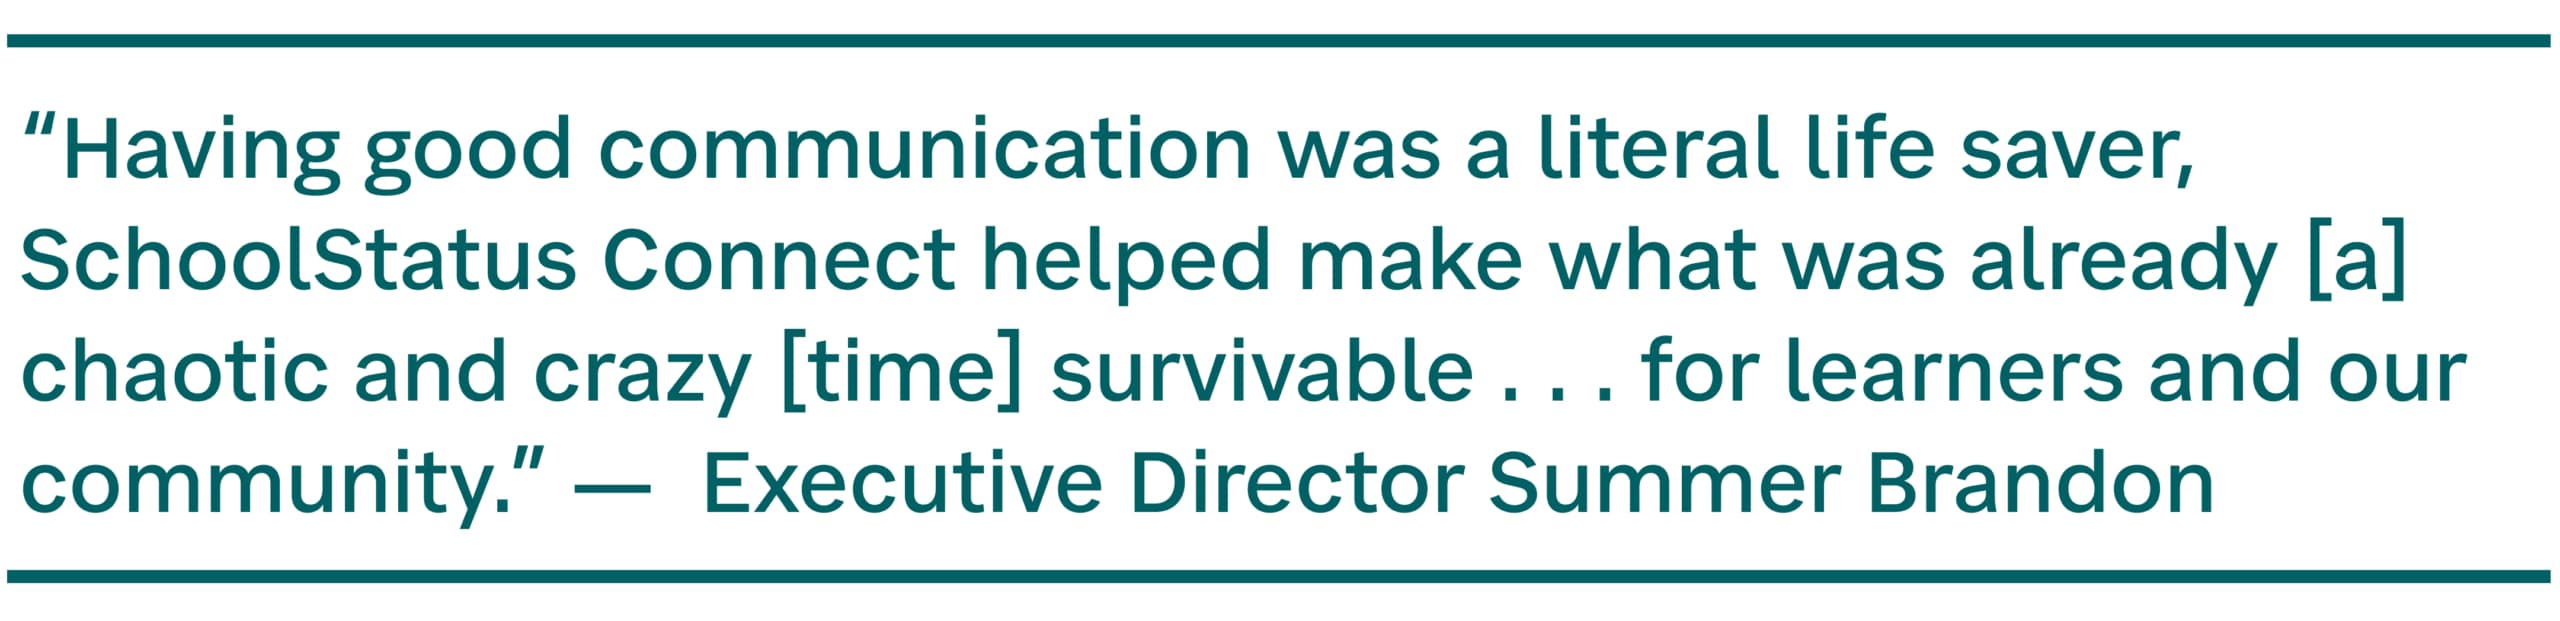 Pull quote: “Having good communication was a literal life saver, SchoolStatus Connect helped make what was already [a] chaotic and crazy [time] survivable . . . for learners and our community.” - Executive Director Summer Brandon